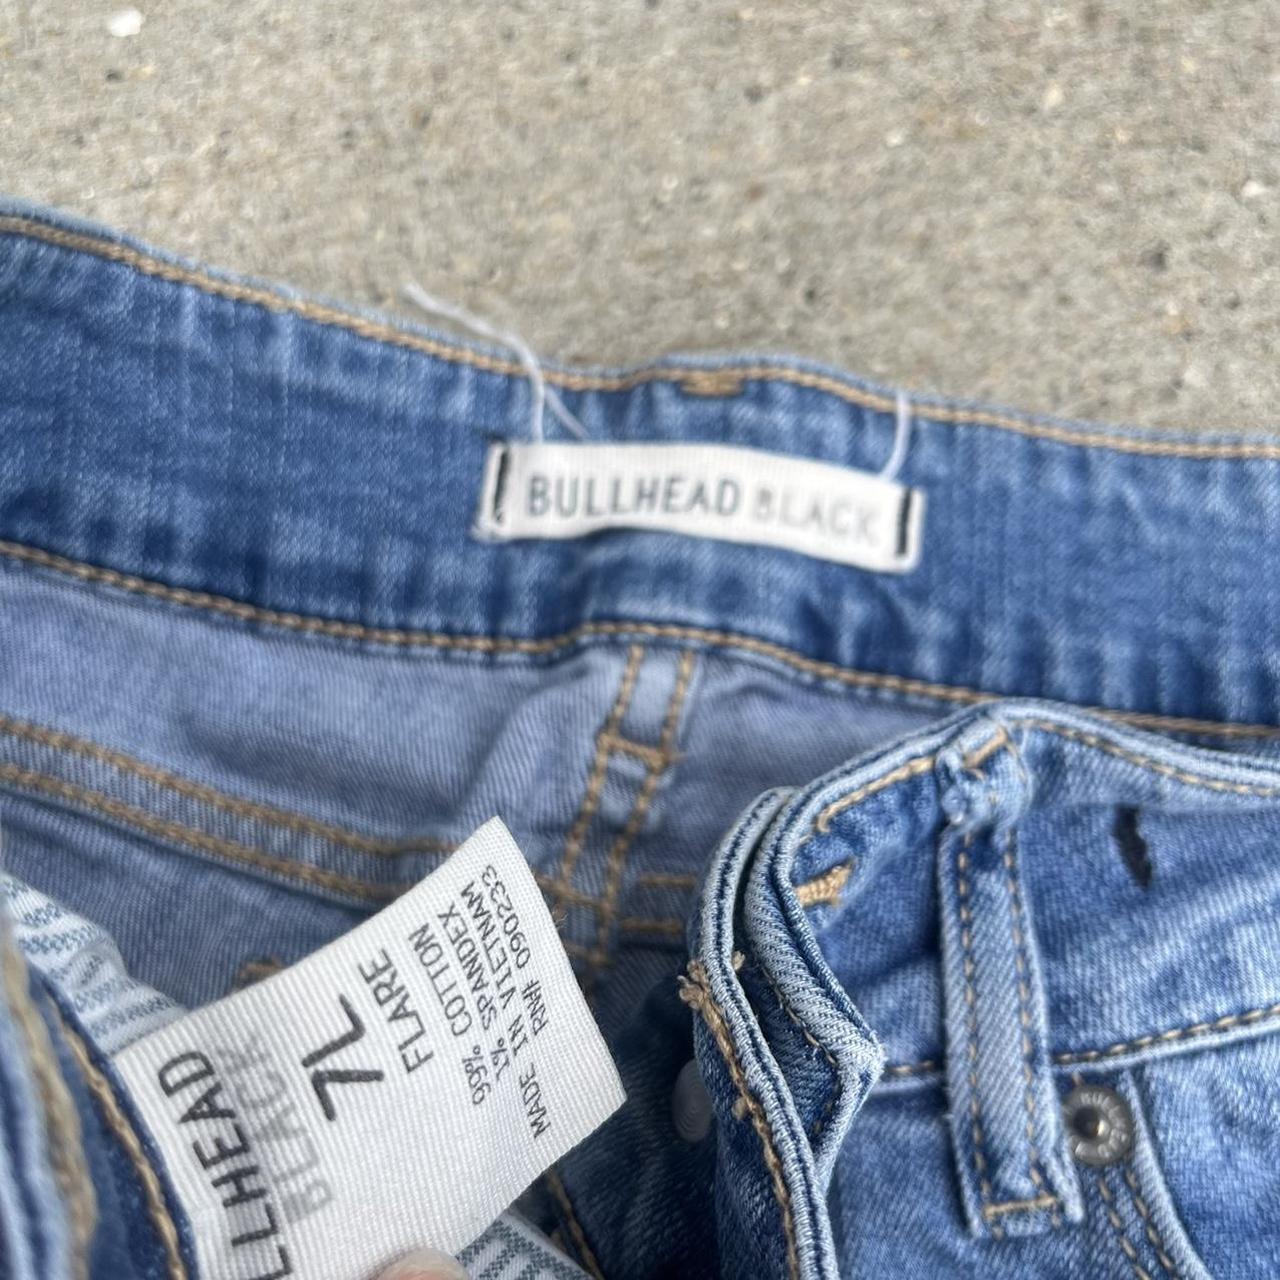 PacSun Women's Blue and White Jeans (3)